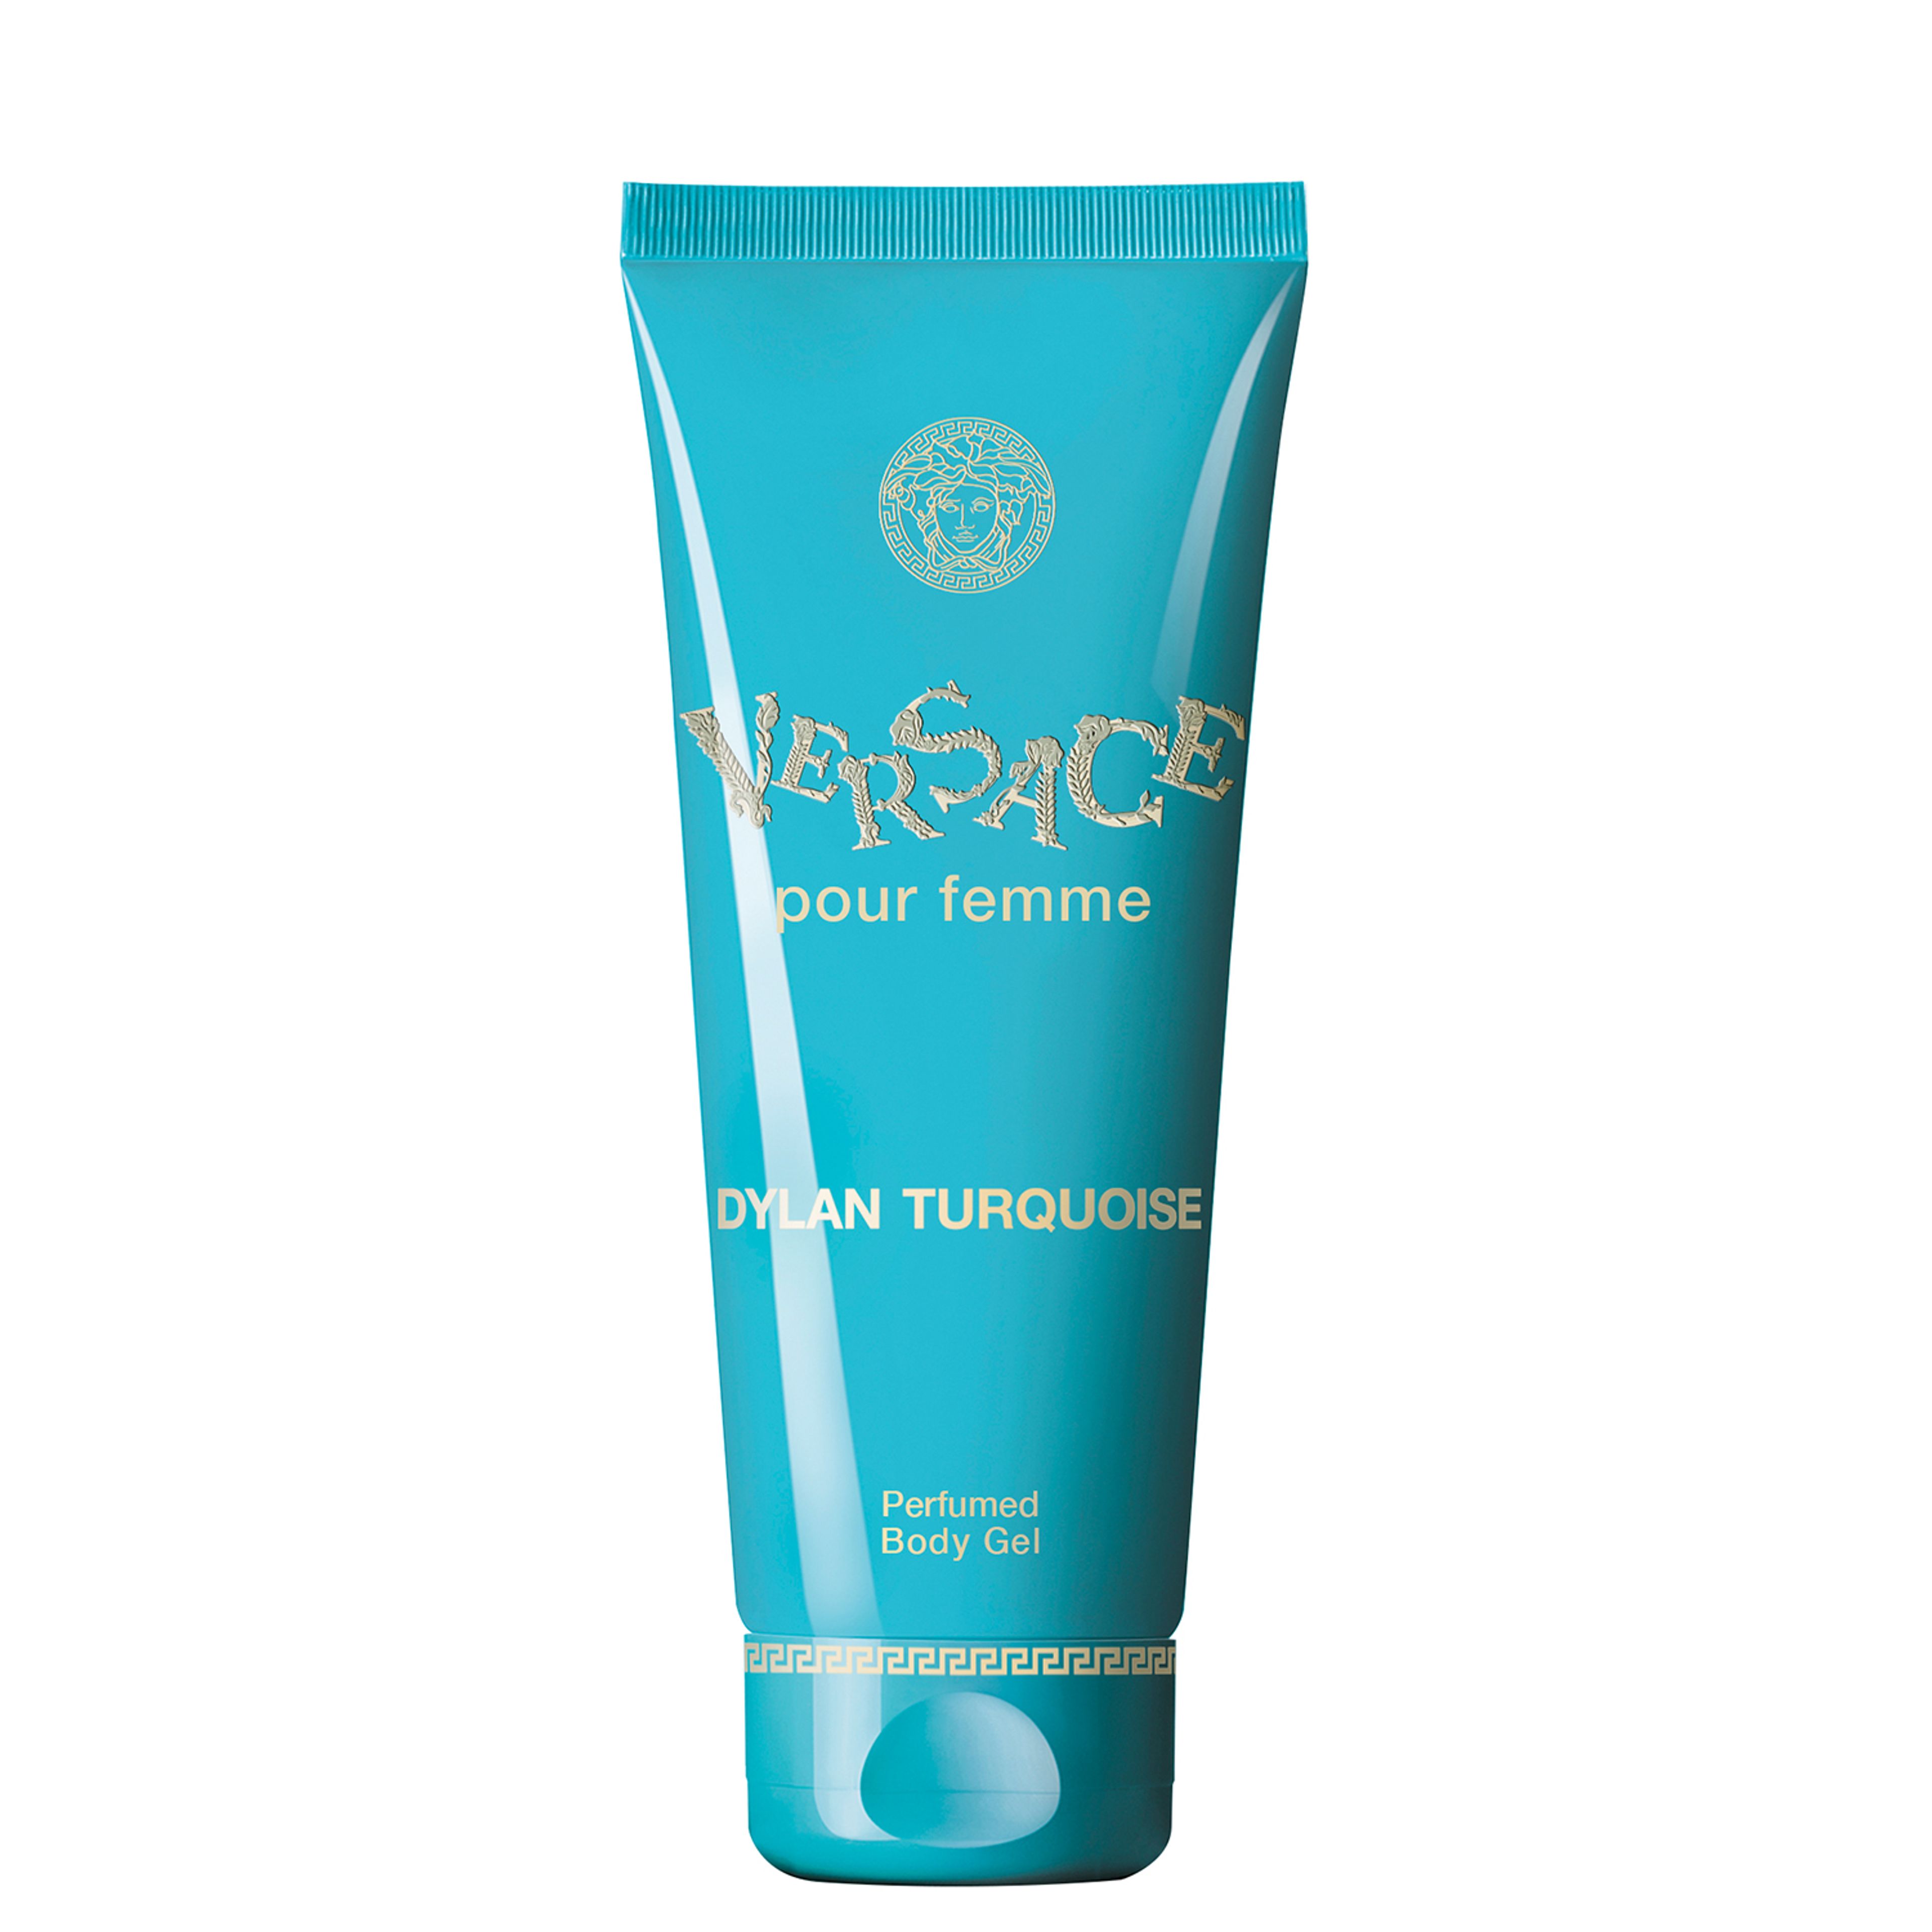 Versace Pour Femme Dylan Turquoise Perfumed Body Gel 1